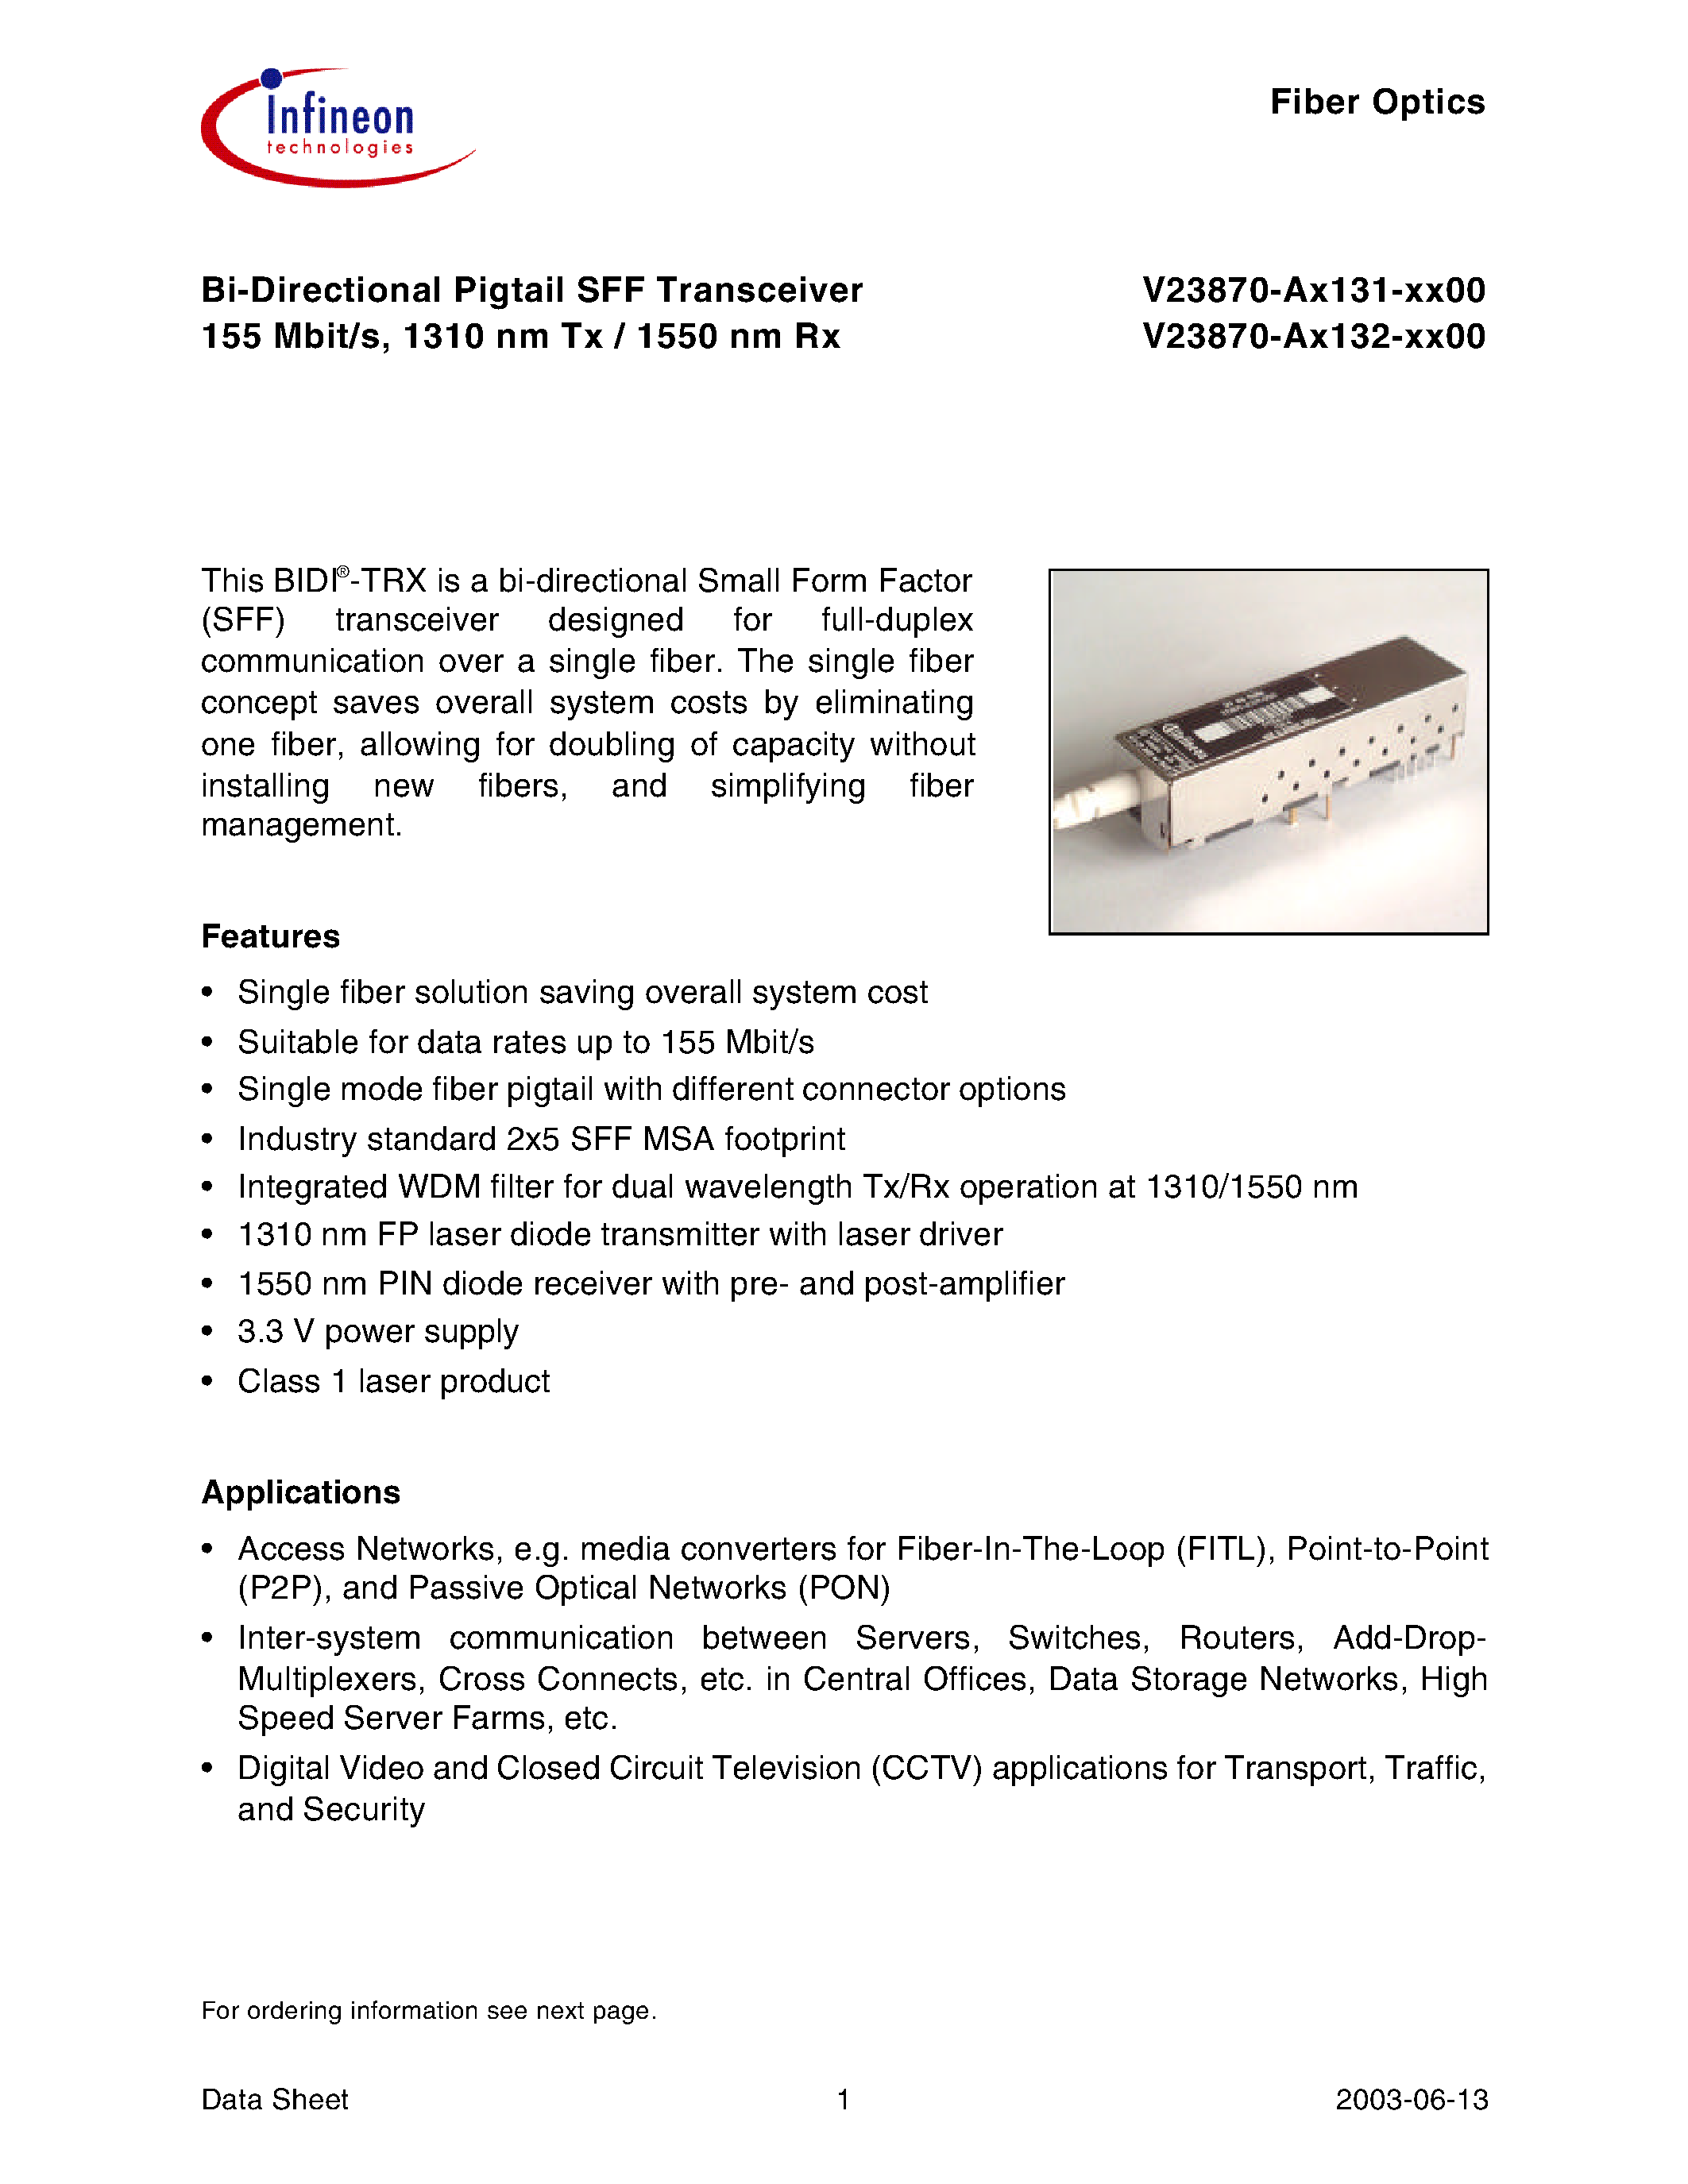 Datasheet V23870-A3131-K200 - Bi-Directional Pigtail SFF Transceiver 155 Mbit/s/ 1310 nm Tx / 1550 nm Rx page 1